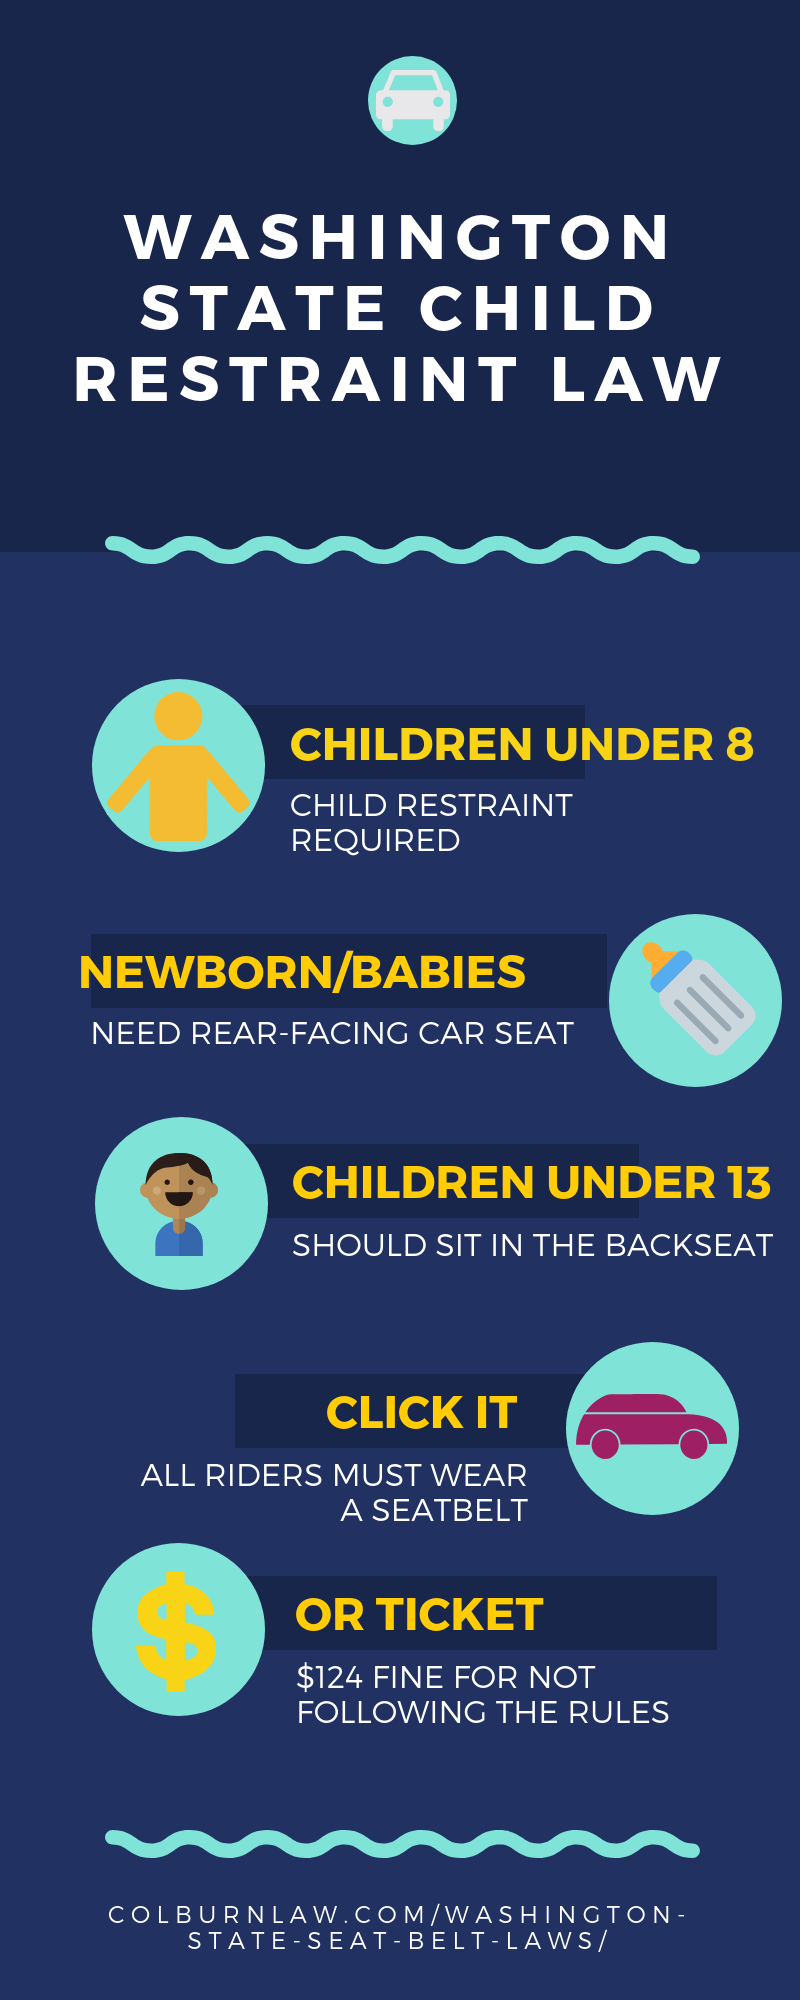 What Are The Seat Belt Laws In Washington State Child Restraint Law - Washington State Car Seat Laws 2021